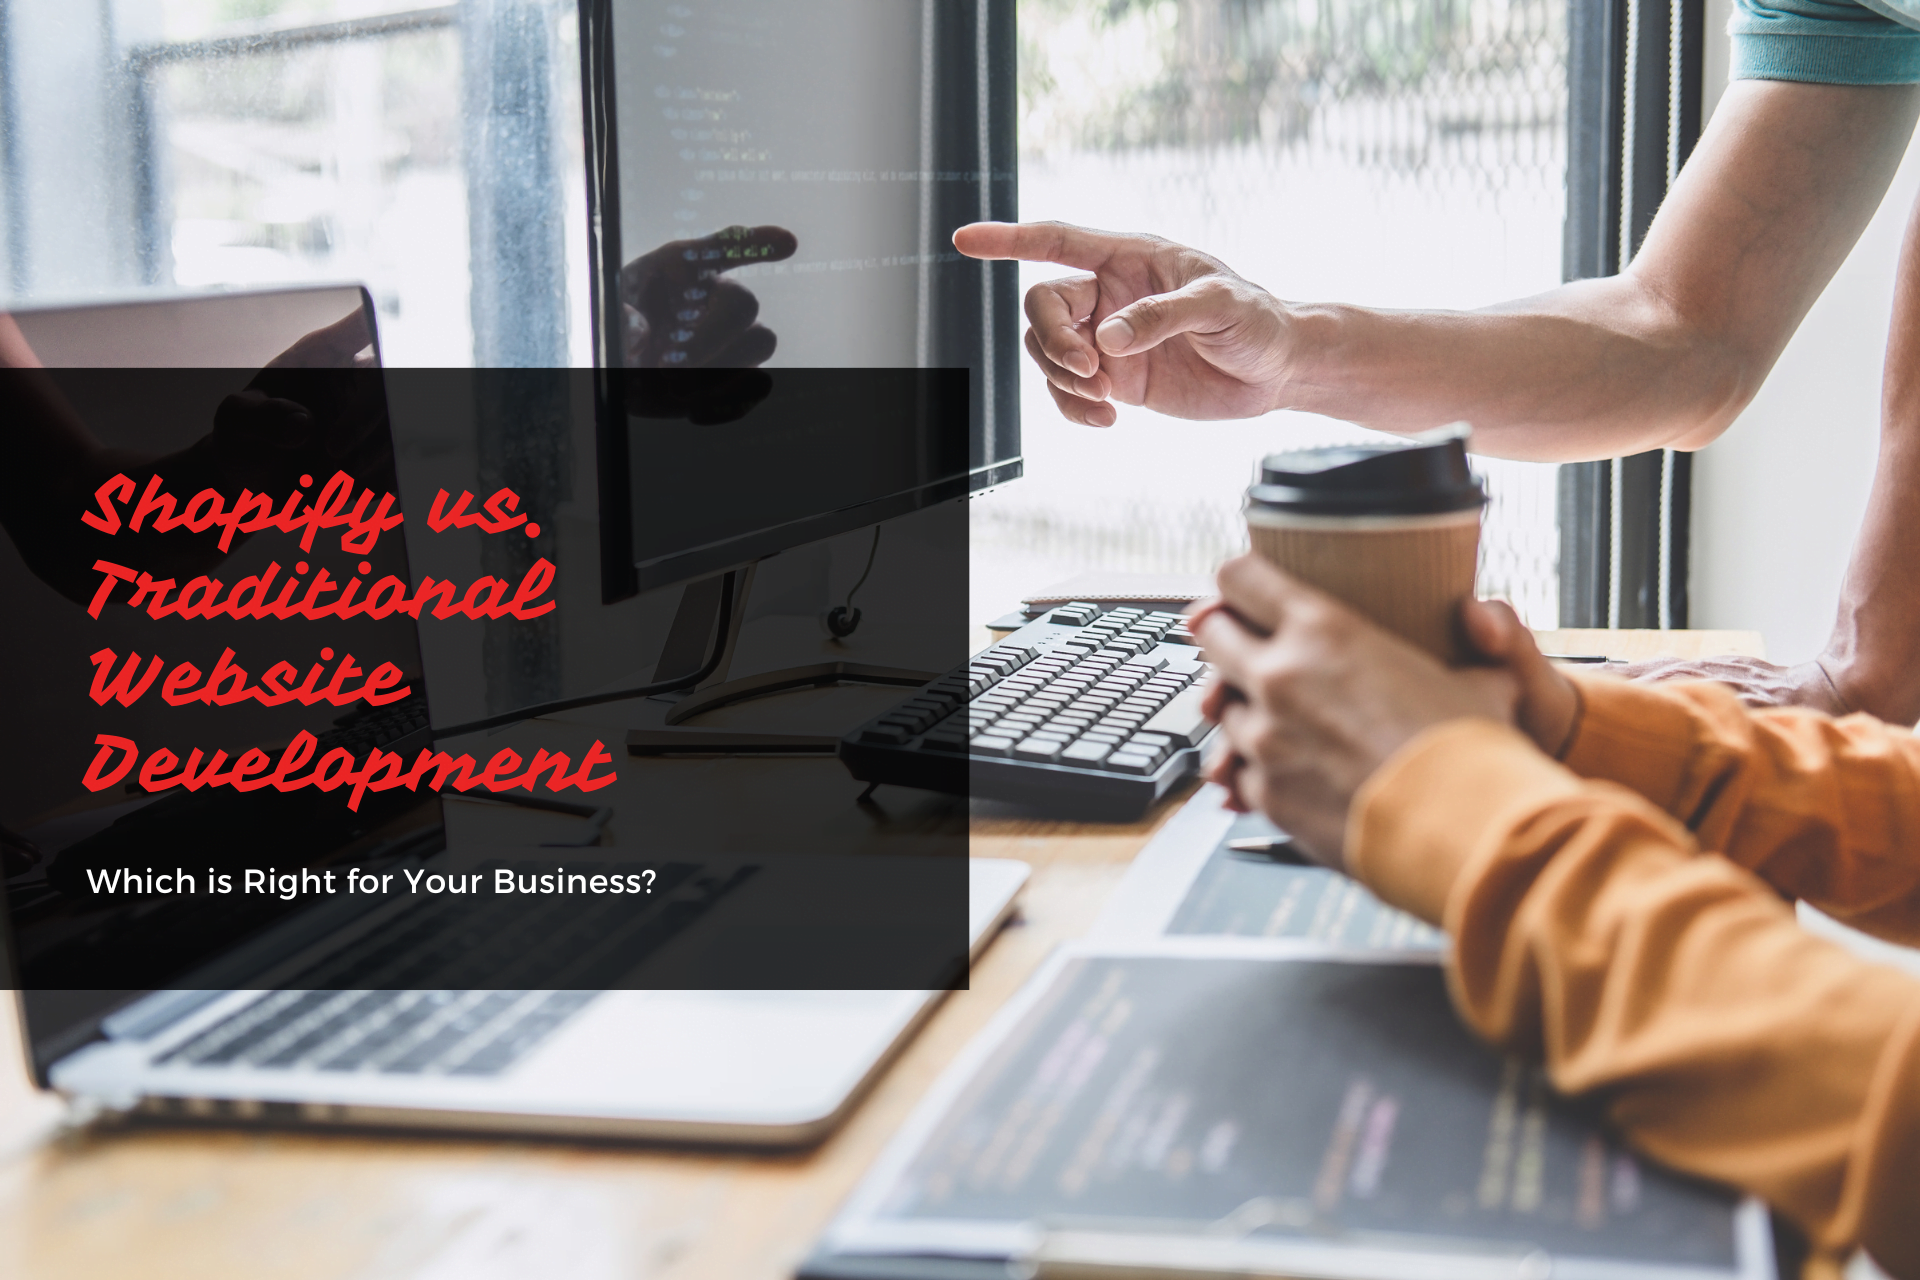 Shopify vs. Traditional Website Development: Which is Right for Your Business?